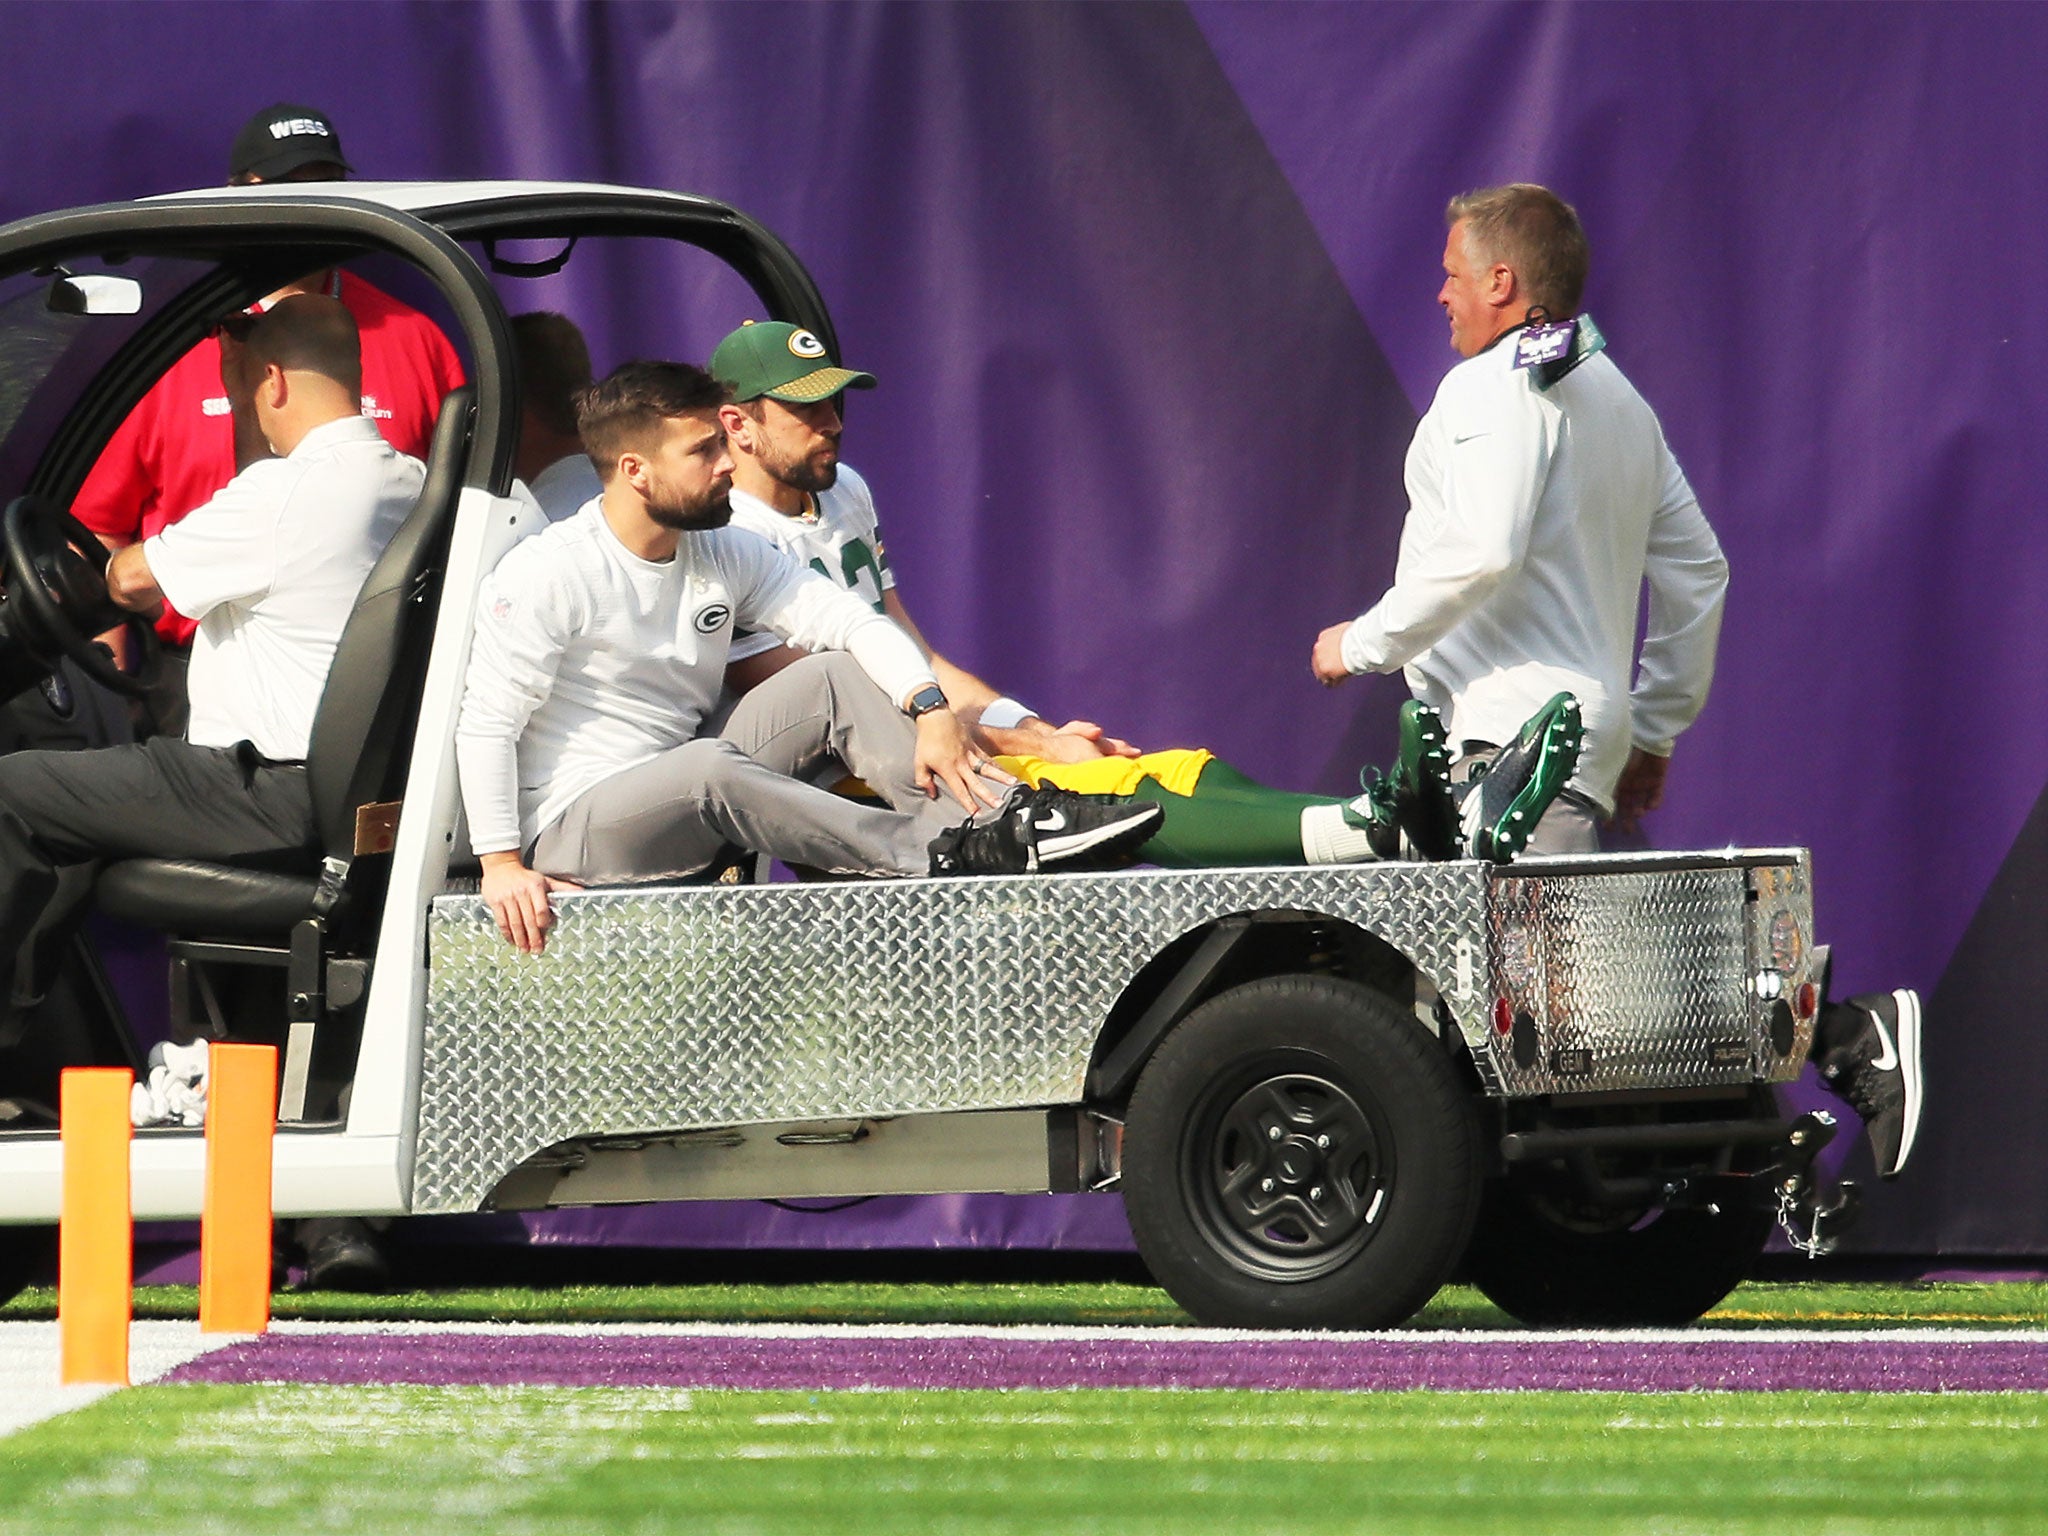 Green Bay fell apart when Rodgers broke his collarbone last year